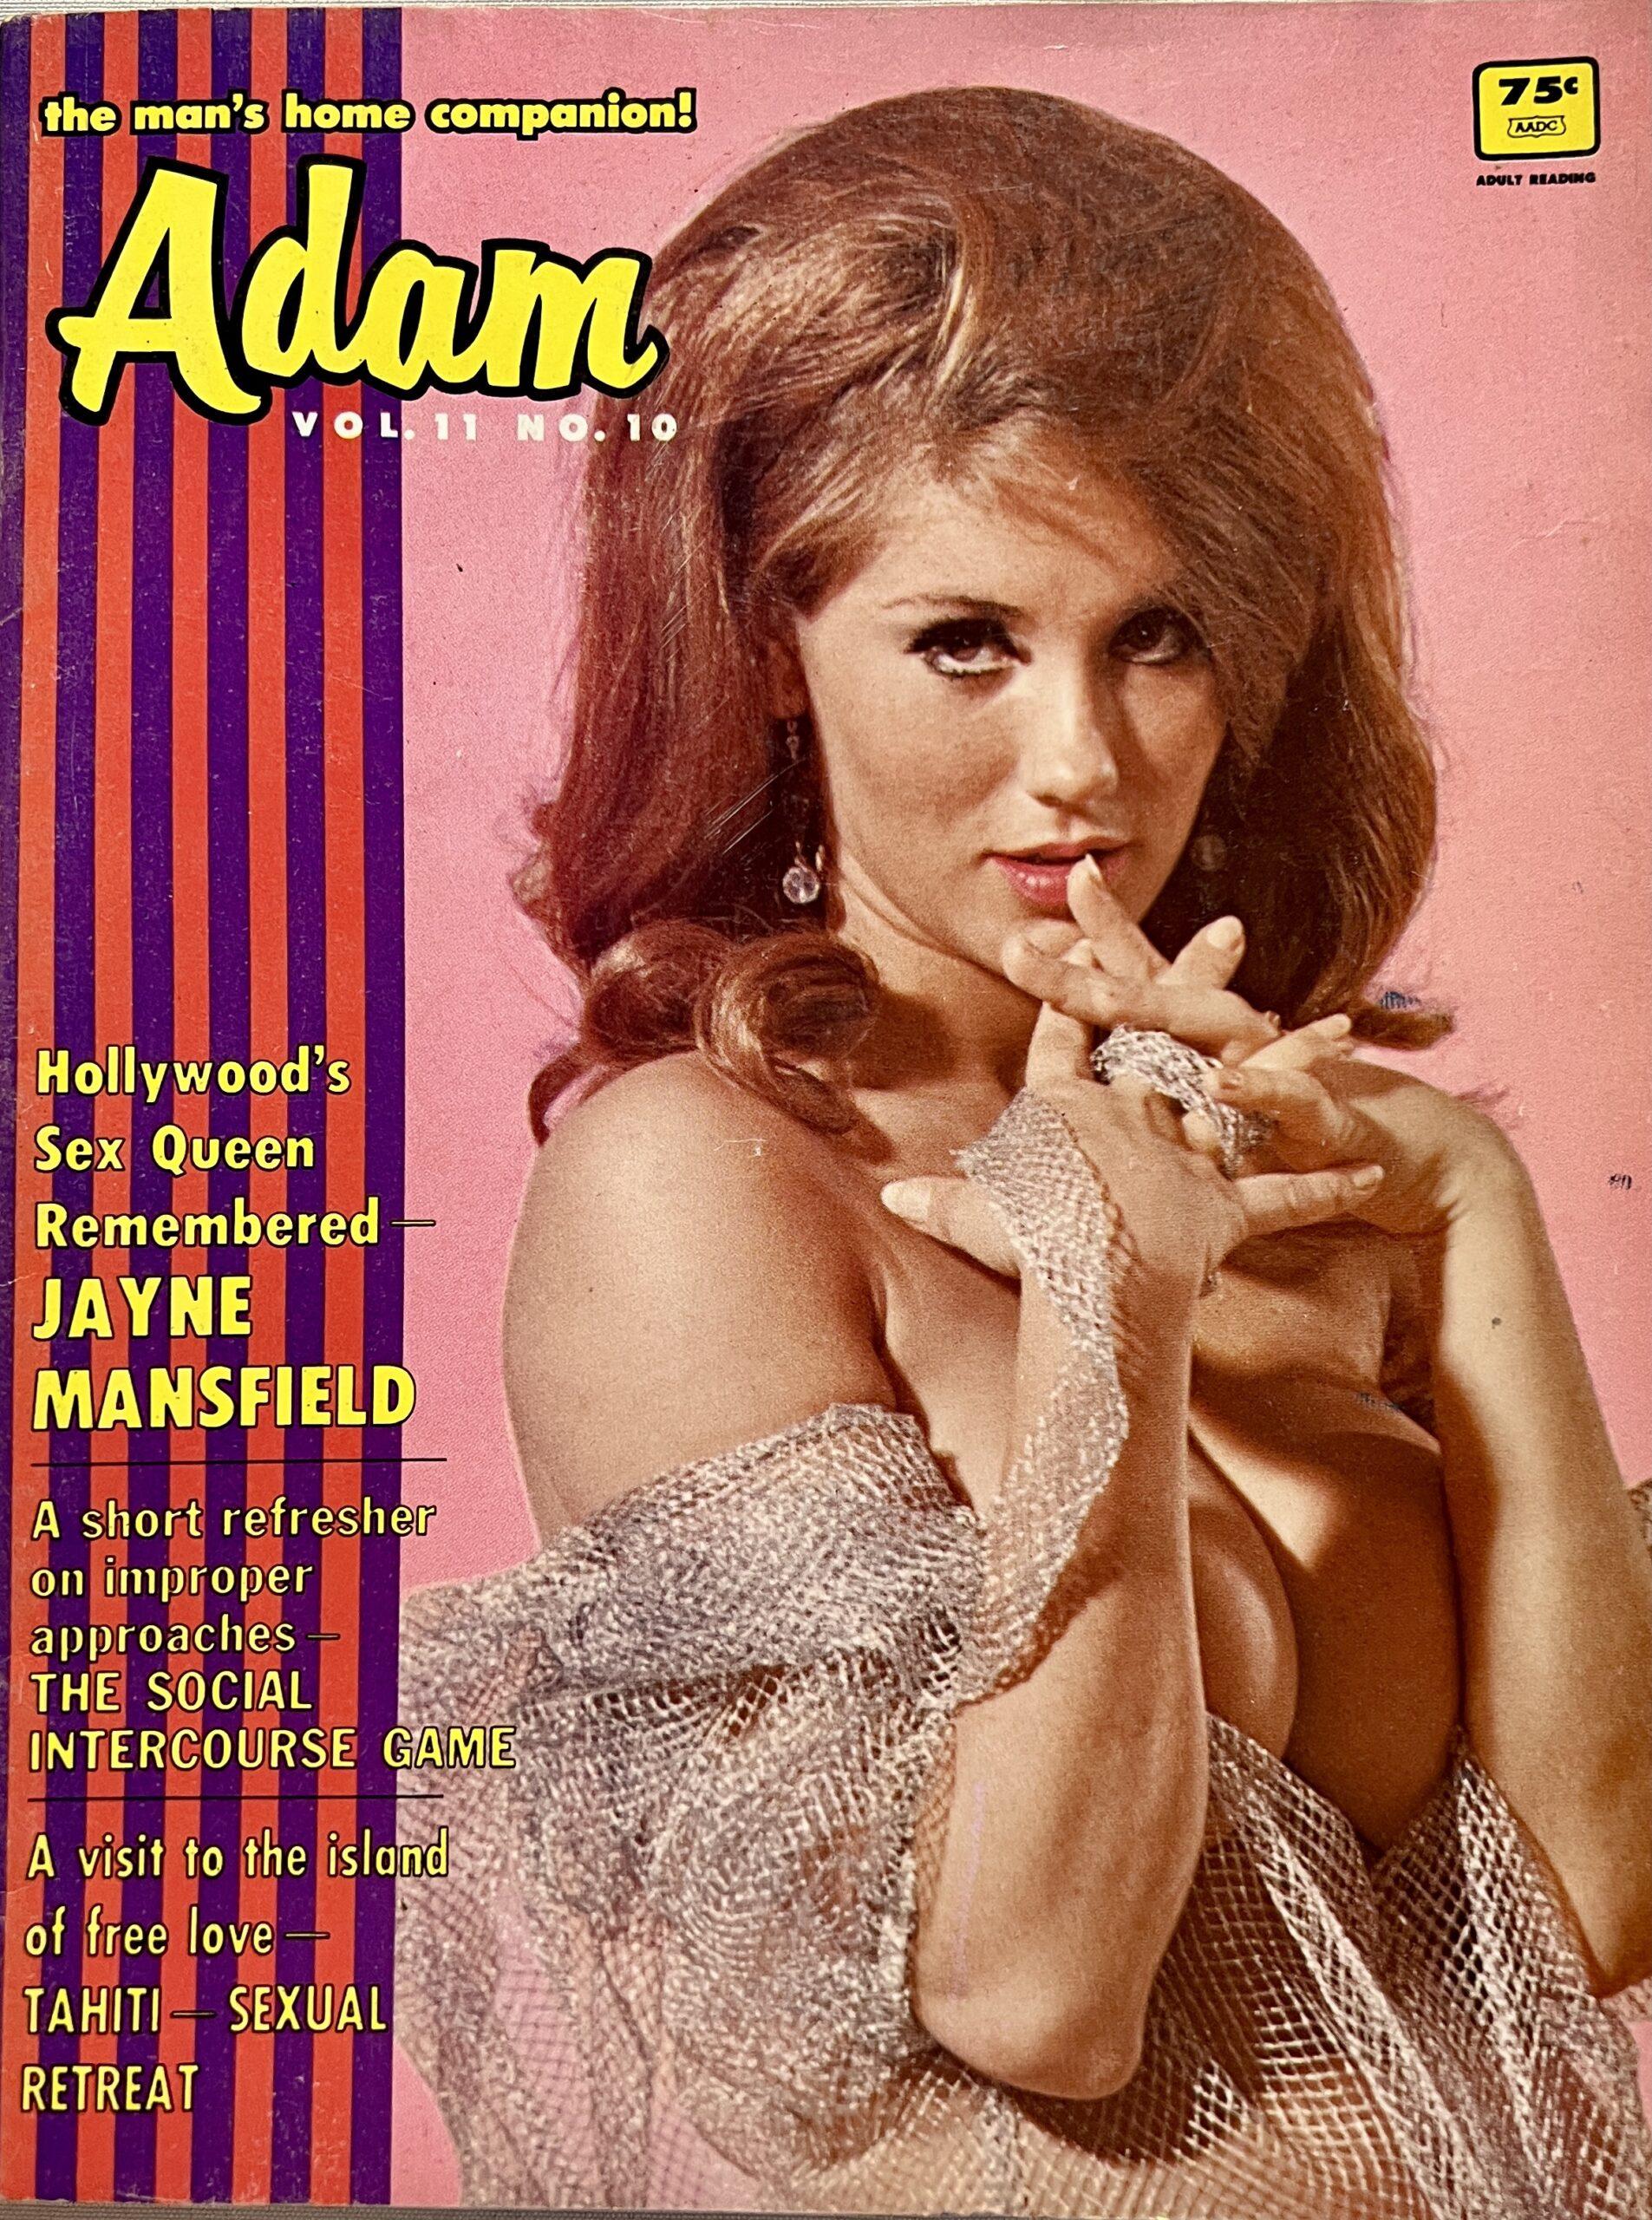 Adam 11/10 October 1967 Adult Swingers and Personals image